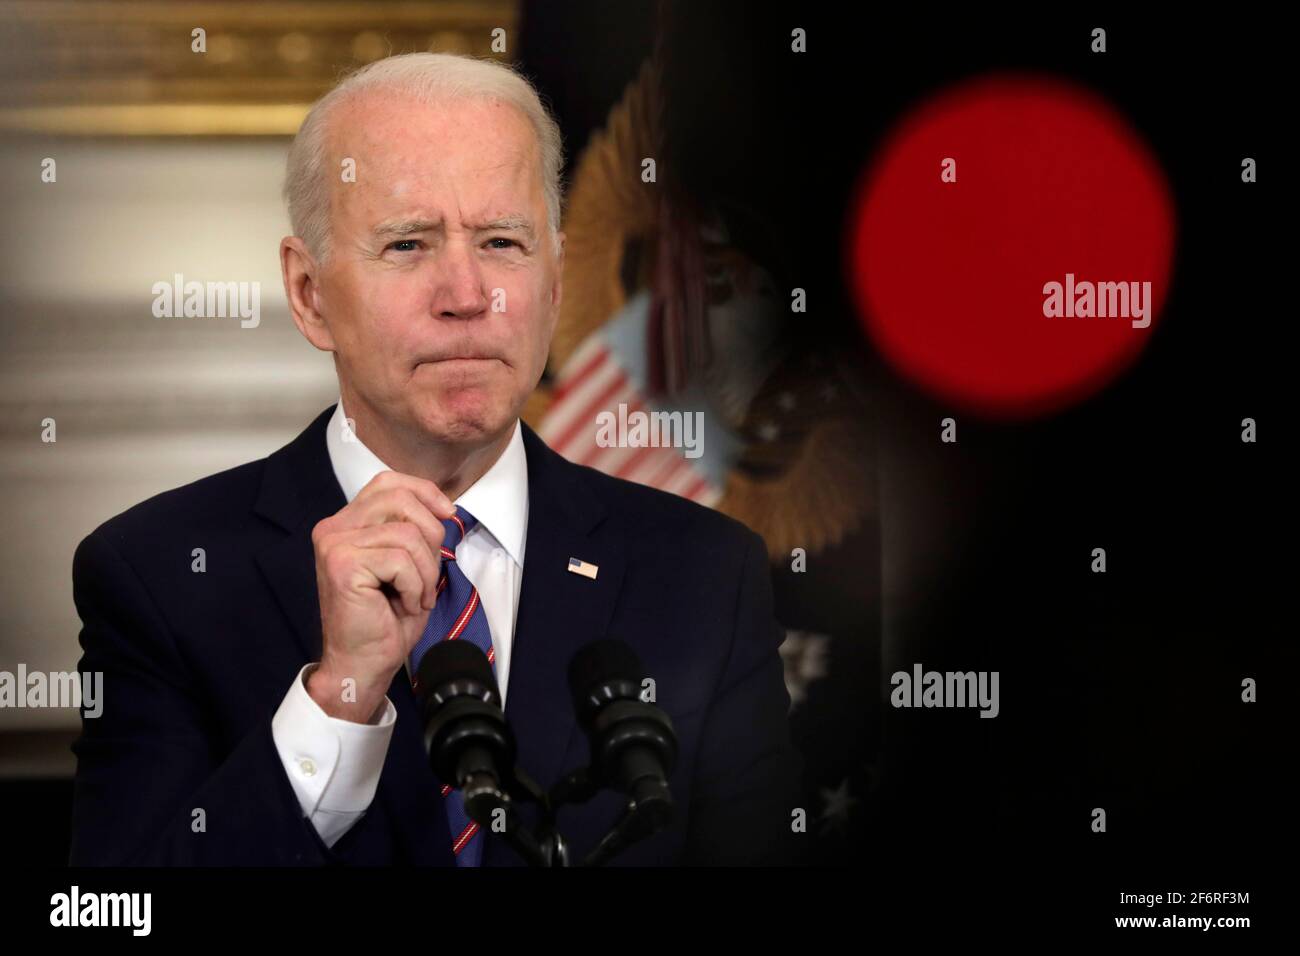 U.S. President Joe Biden delivers remarks on the March jobs report at the White House in Washington on April 2, 2021. Credit: Yuri Gripas/Pool via CNP /MediaPunch Stock Photo